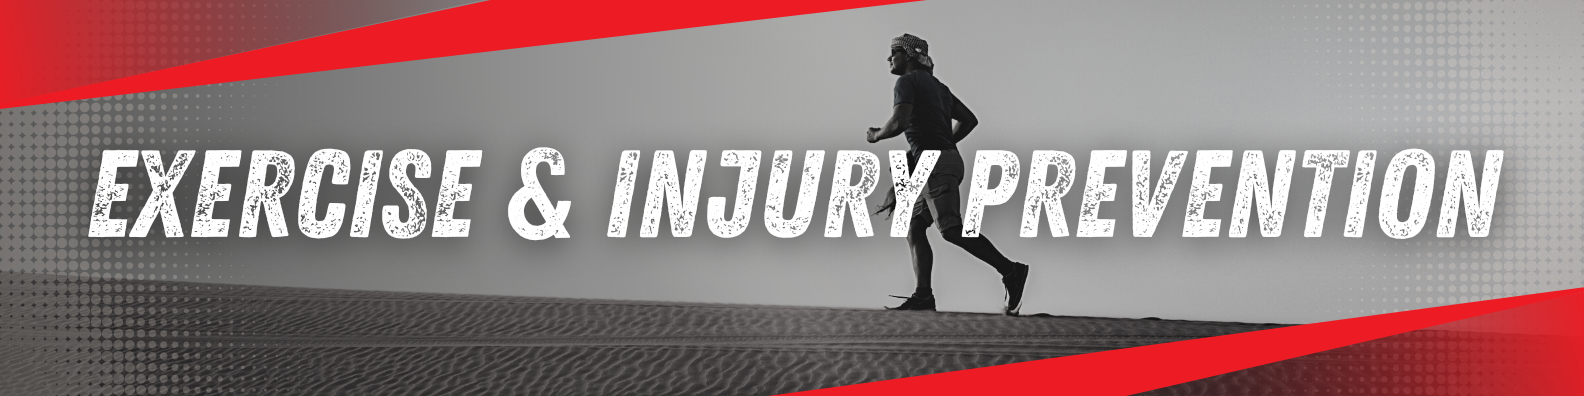 Exercise and injury prevention banner